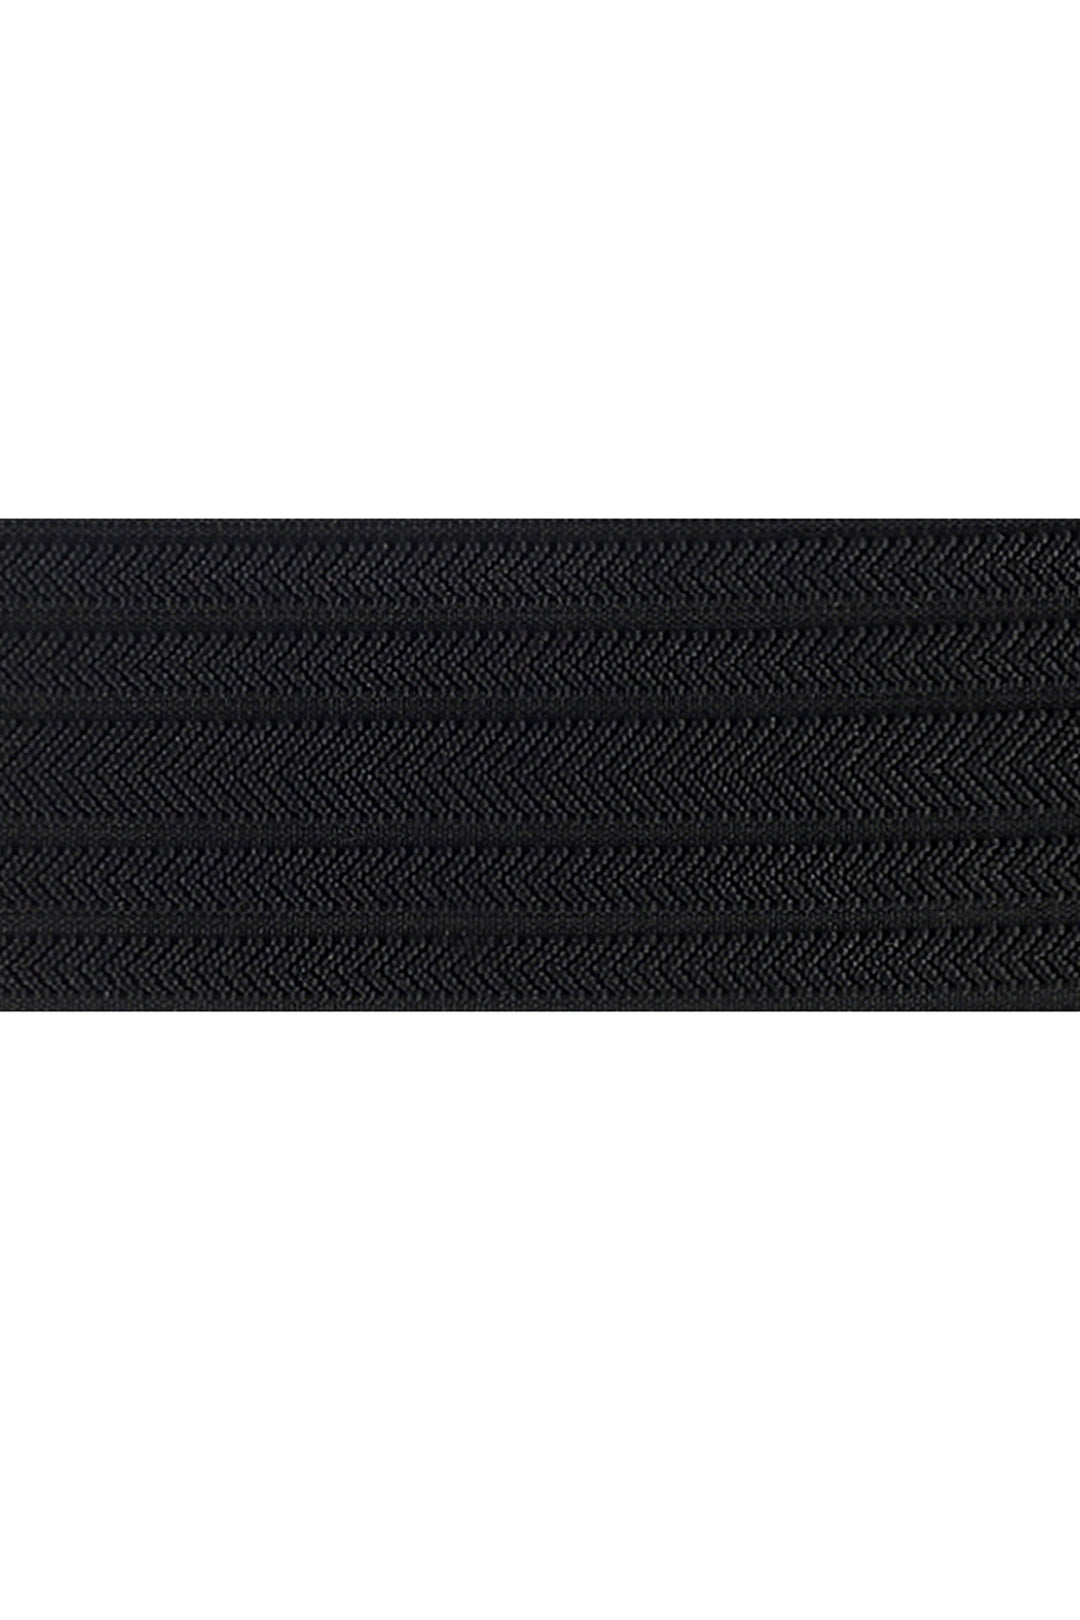 Black Knitted Strong Stretchable Elastic